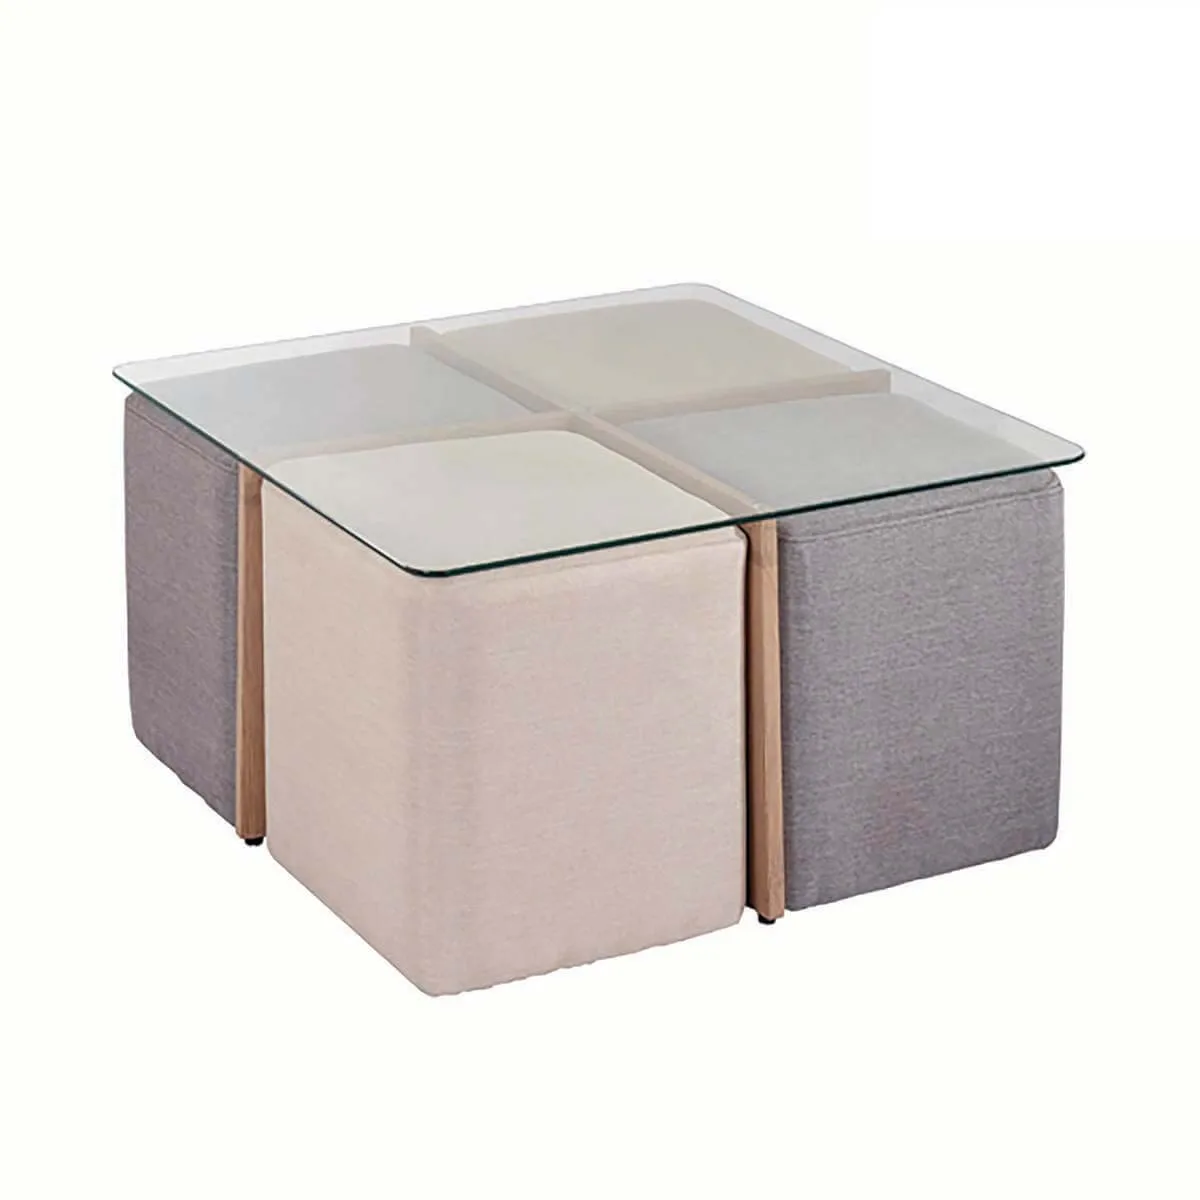 
HOMEMORE High quality style living room space saving home furniture designer coffee table  (1600181910537)